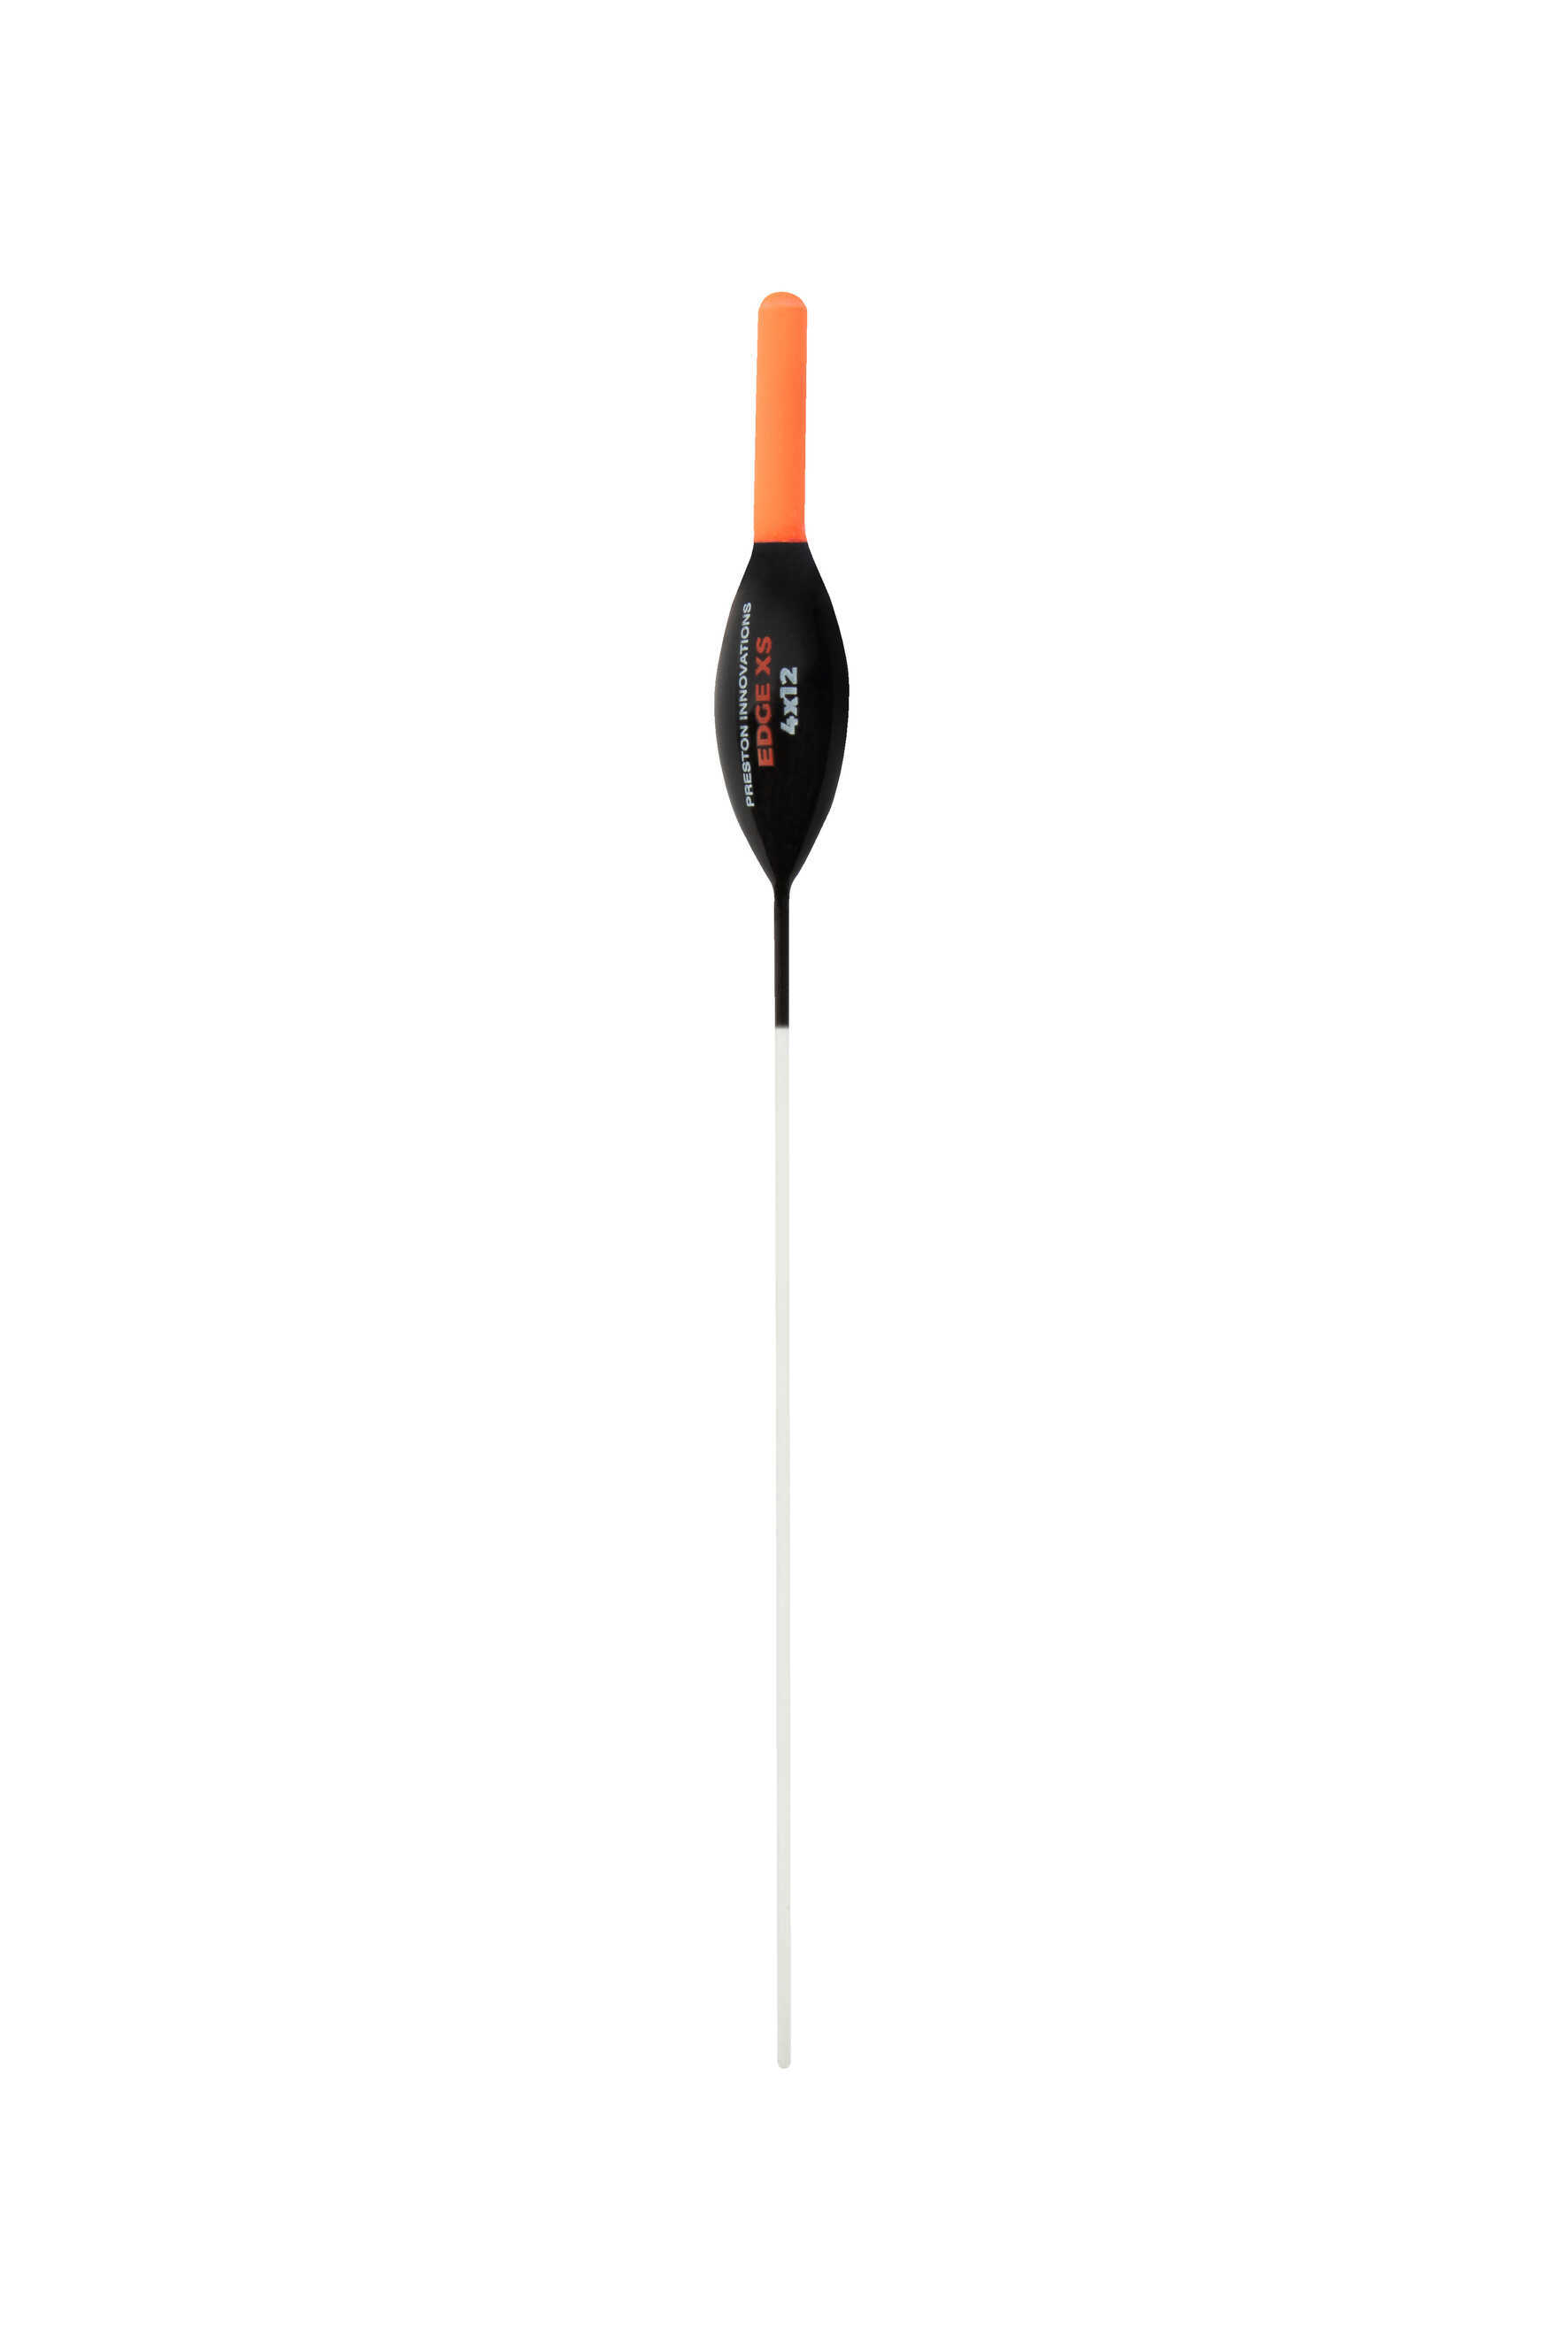 Edge XS Pole Floats, UK Match Fishing Tackle For True Anglers